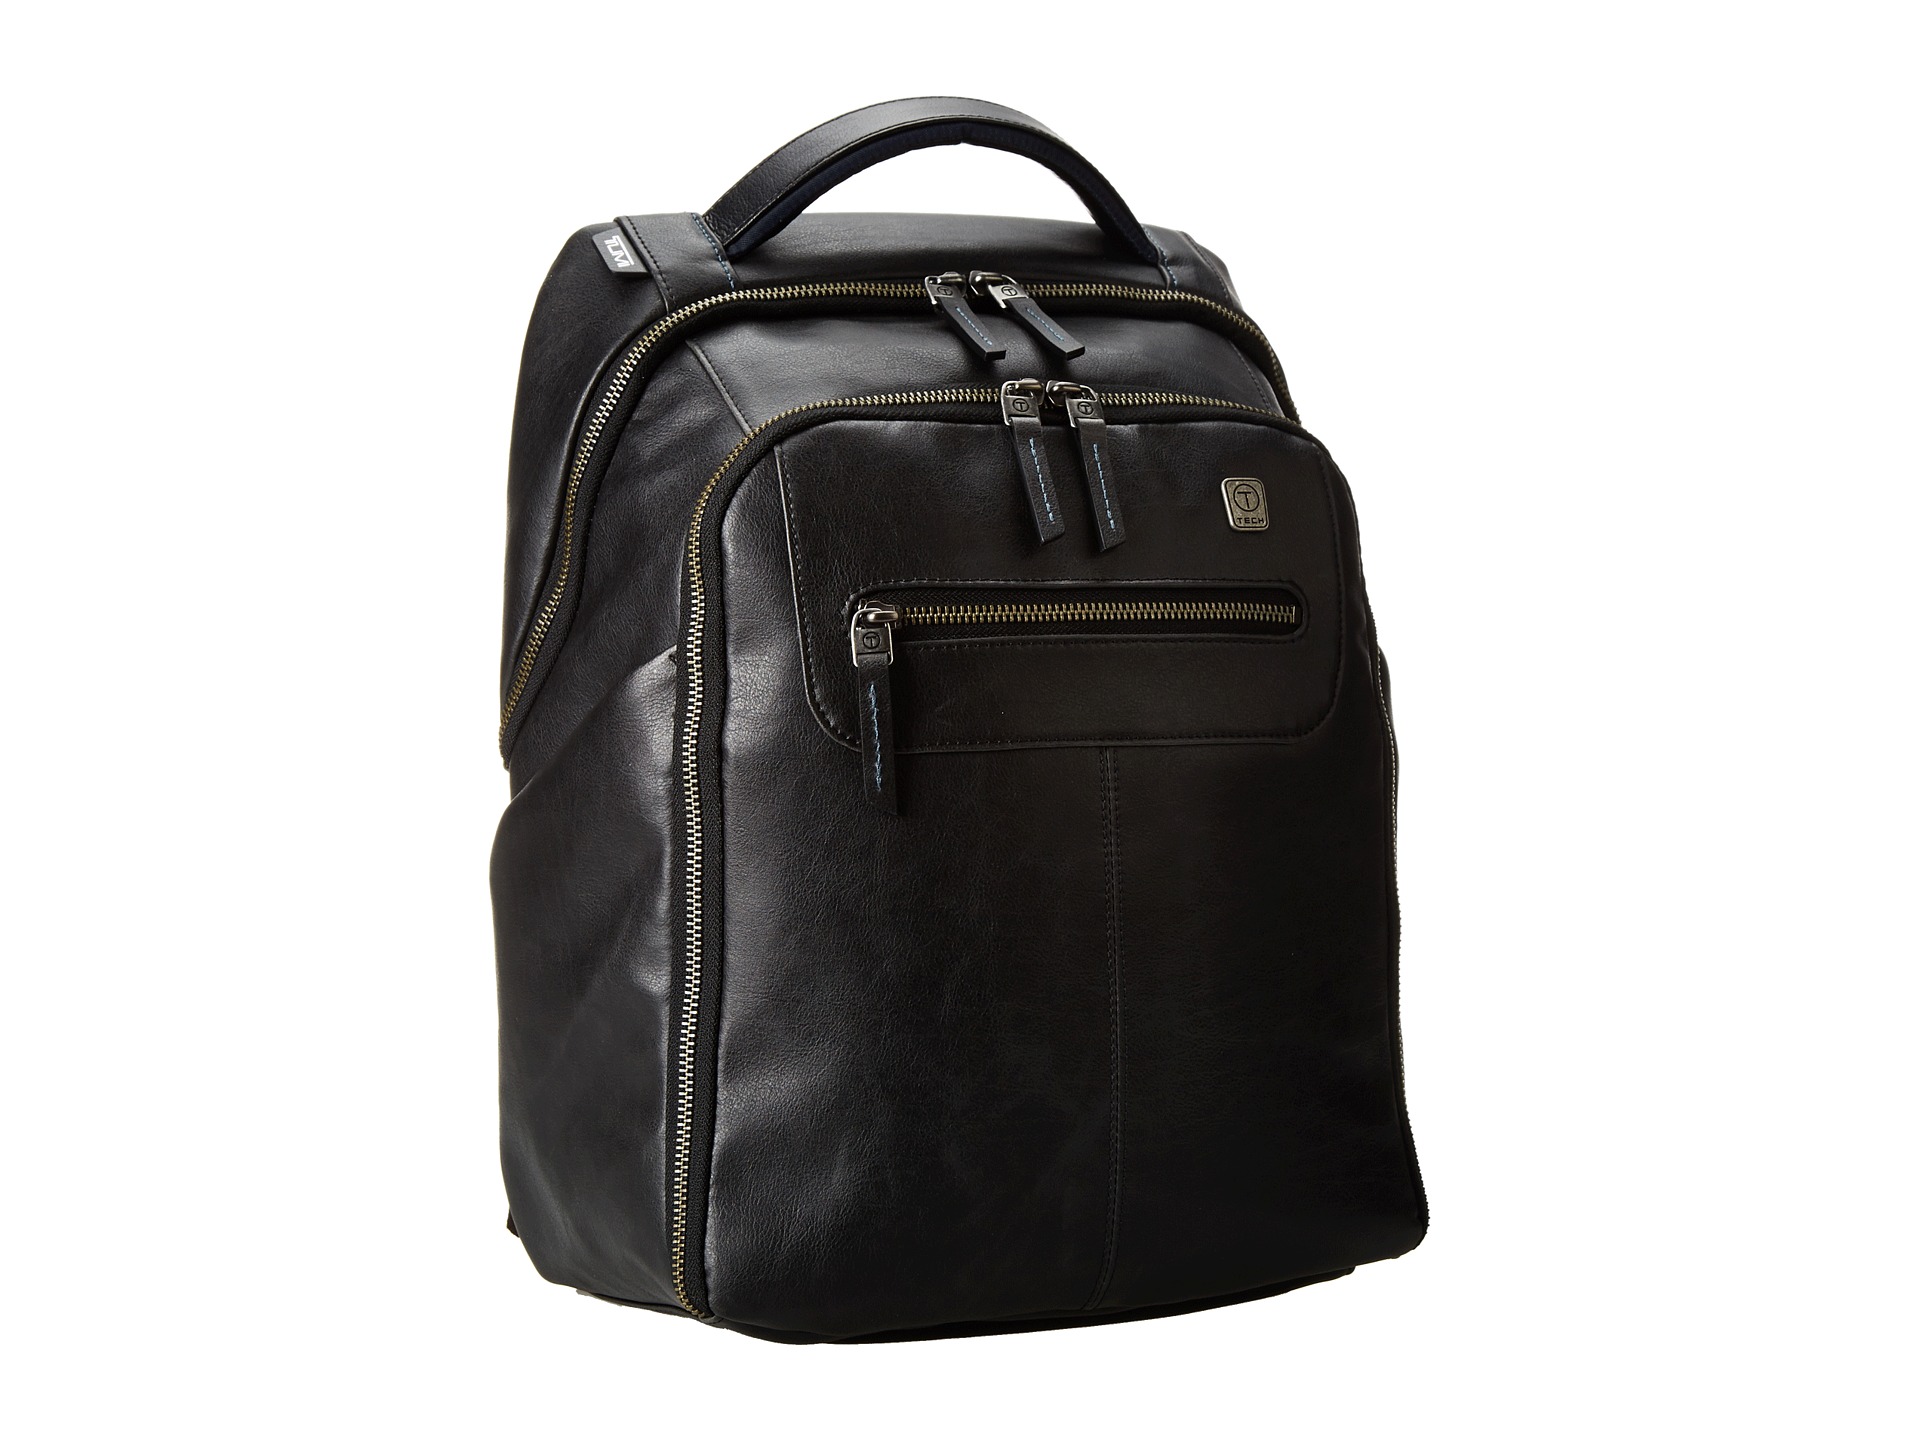 Tumi T Tech Forge Steel City Slim Leather Backpack Black